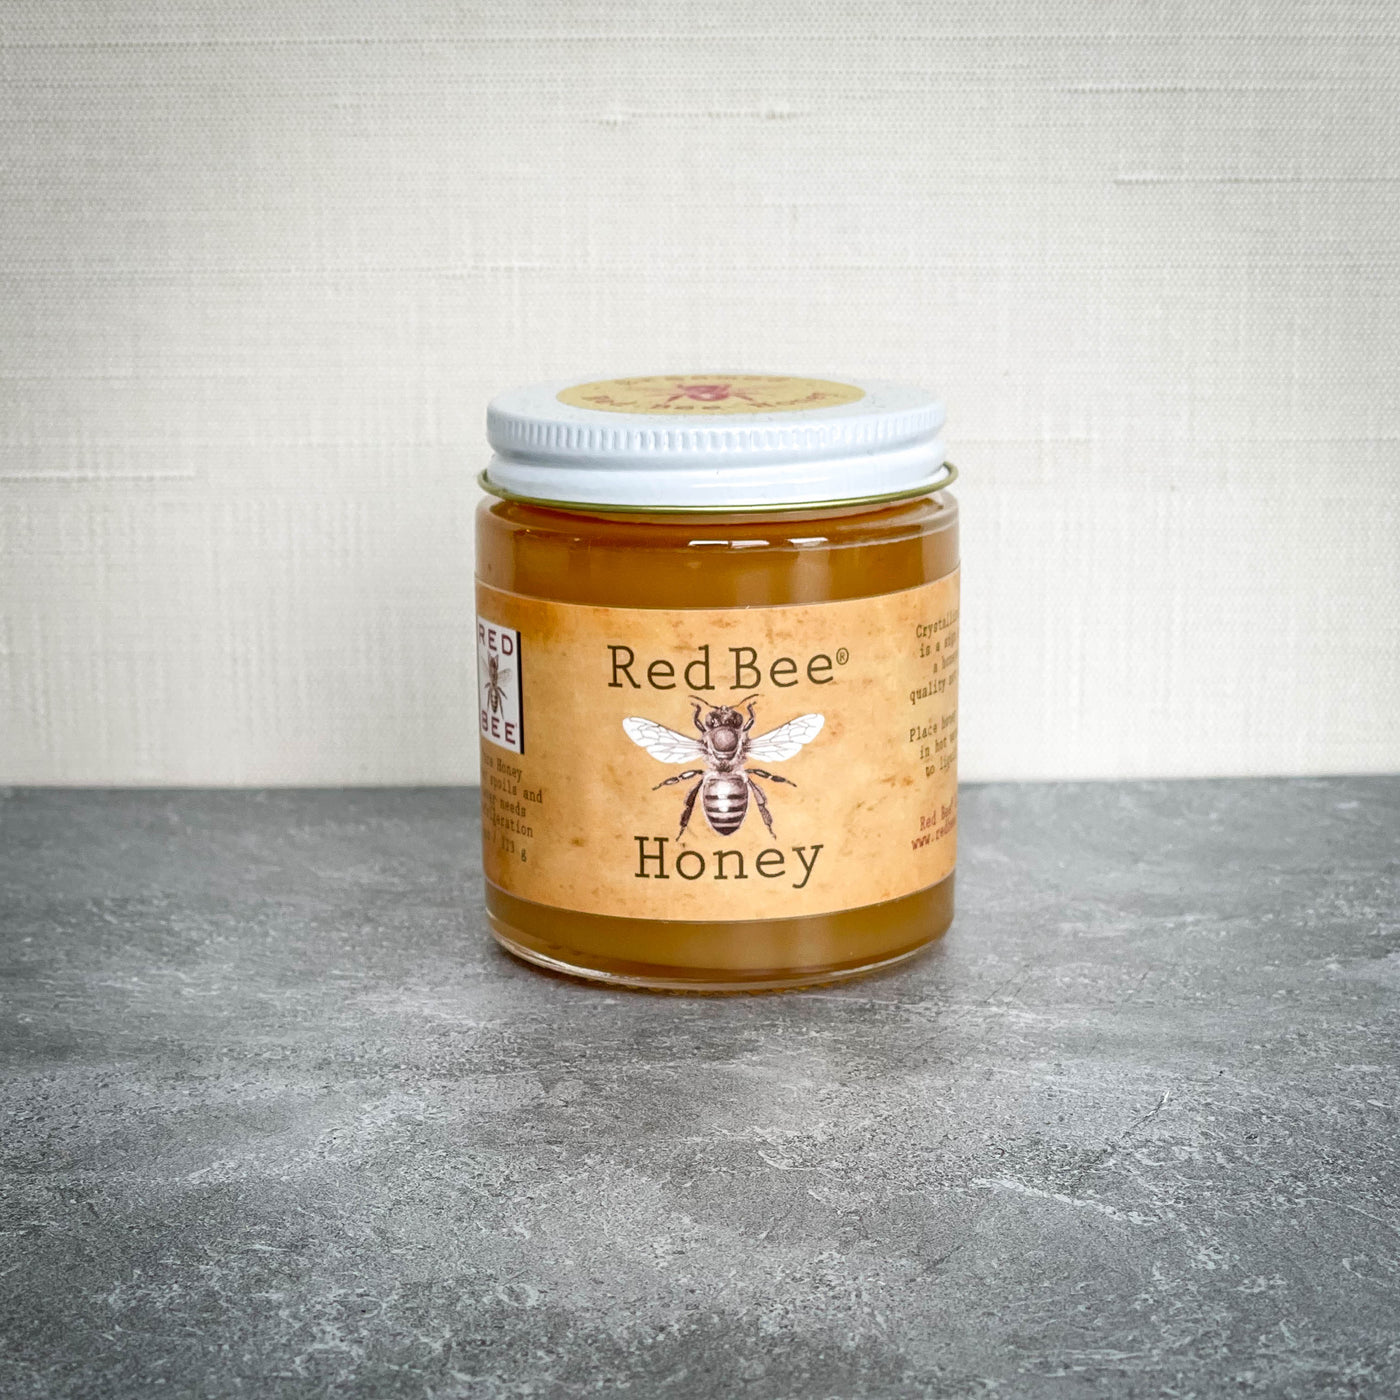 CREAMED HONEY / Red Bee / Connecticut